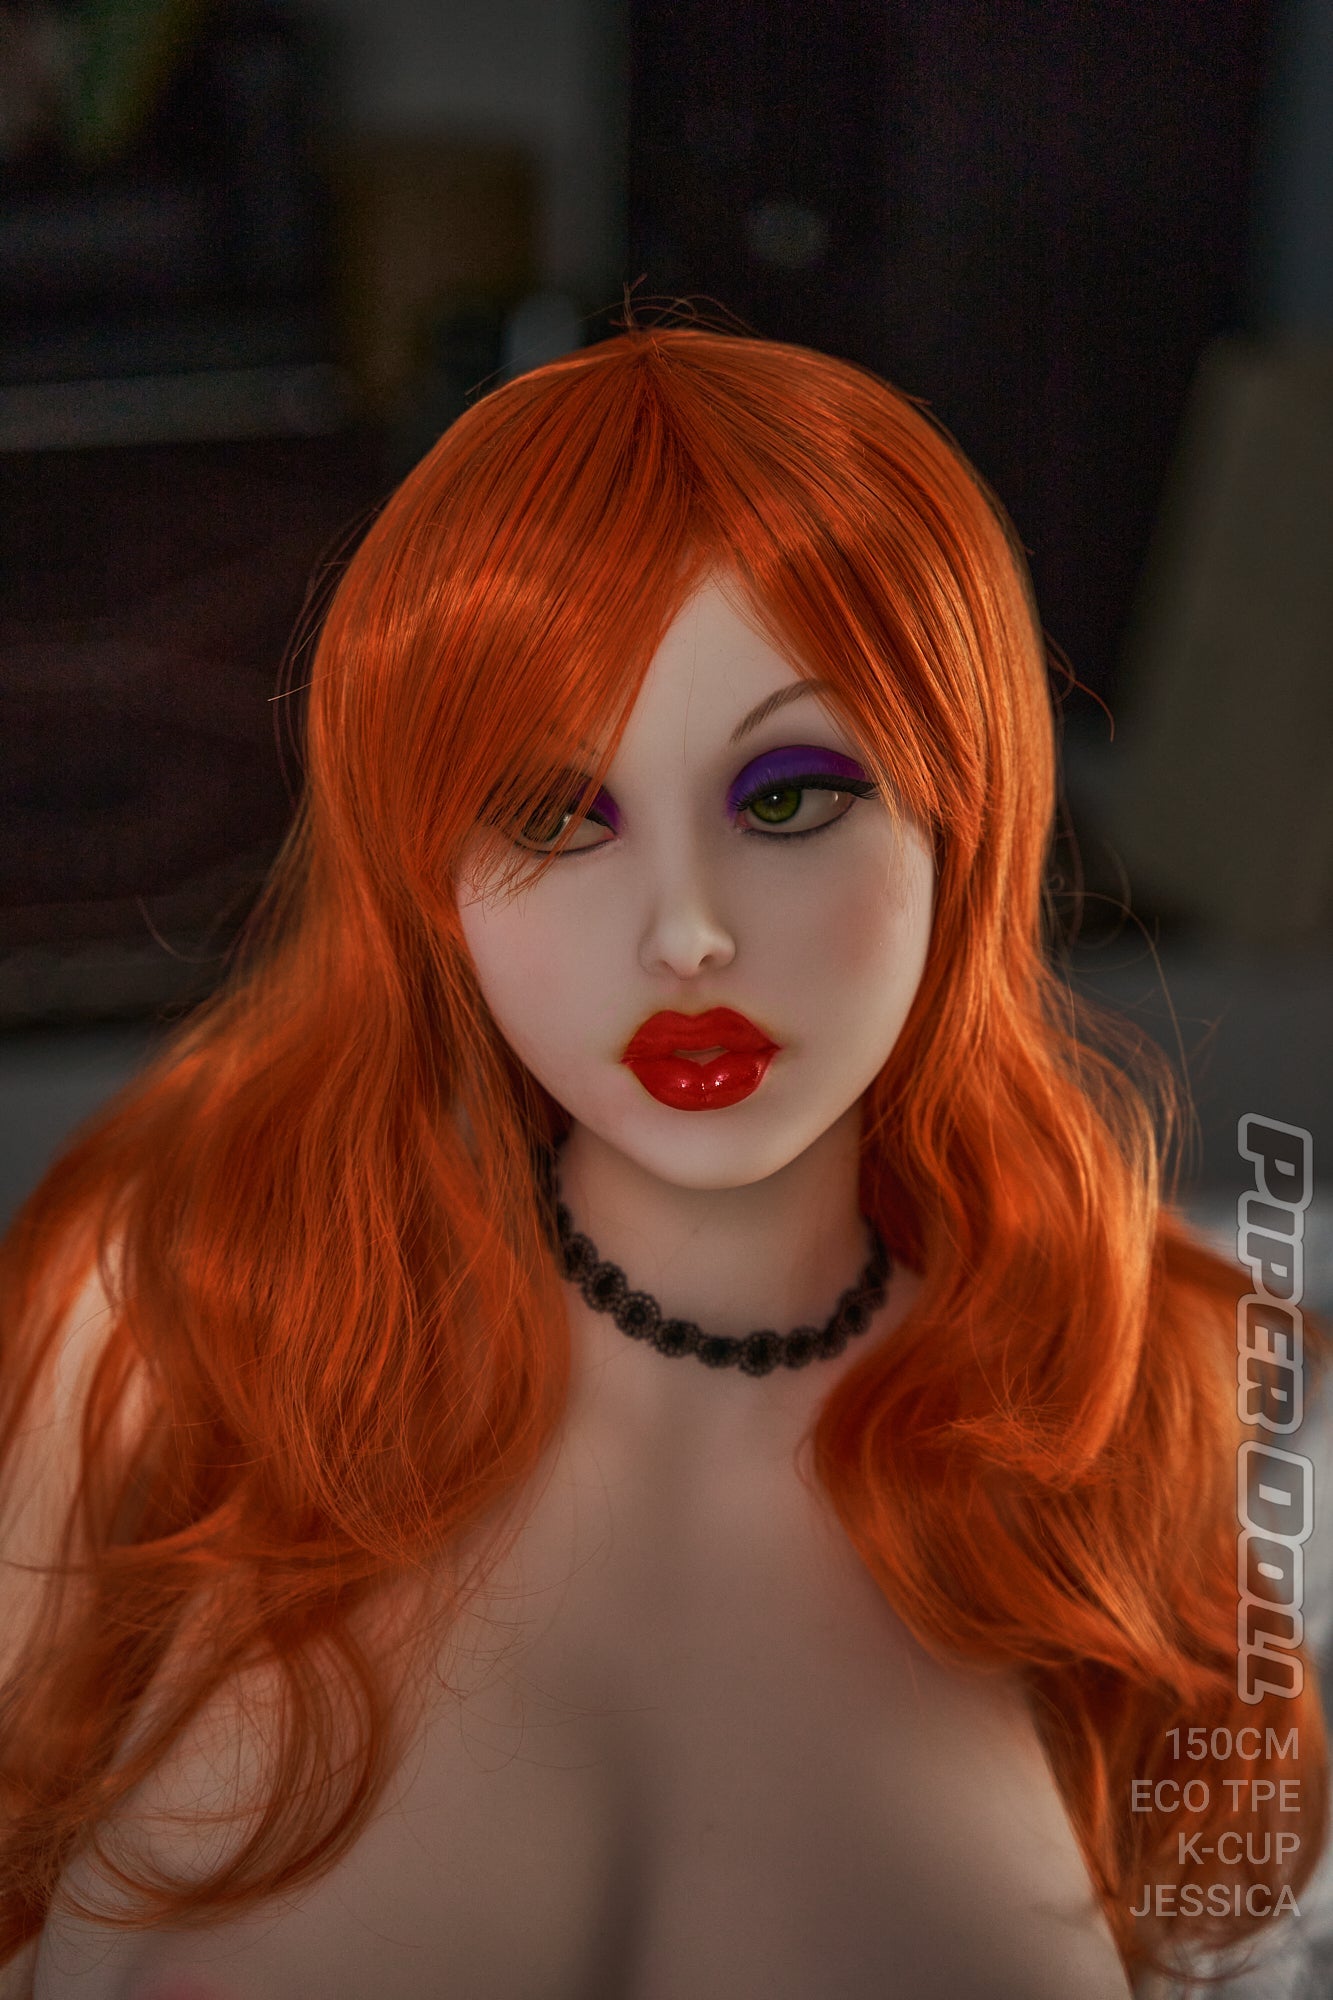 Piper Doll 150 cm K Silicone - Jessica | Buy Sex Dolls at DOLLS ACTUALLY